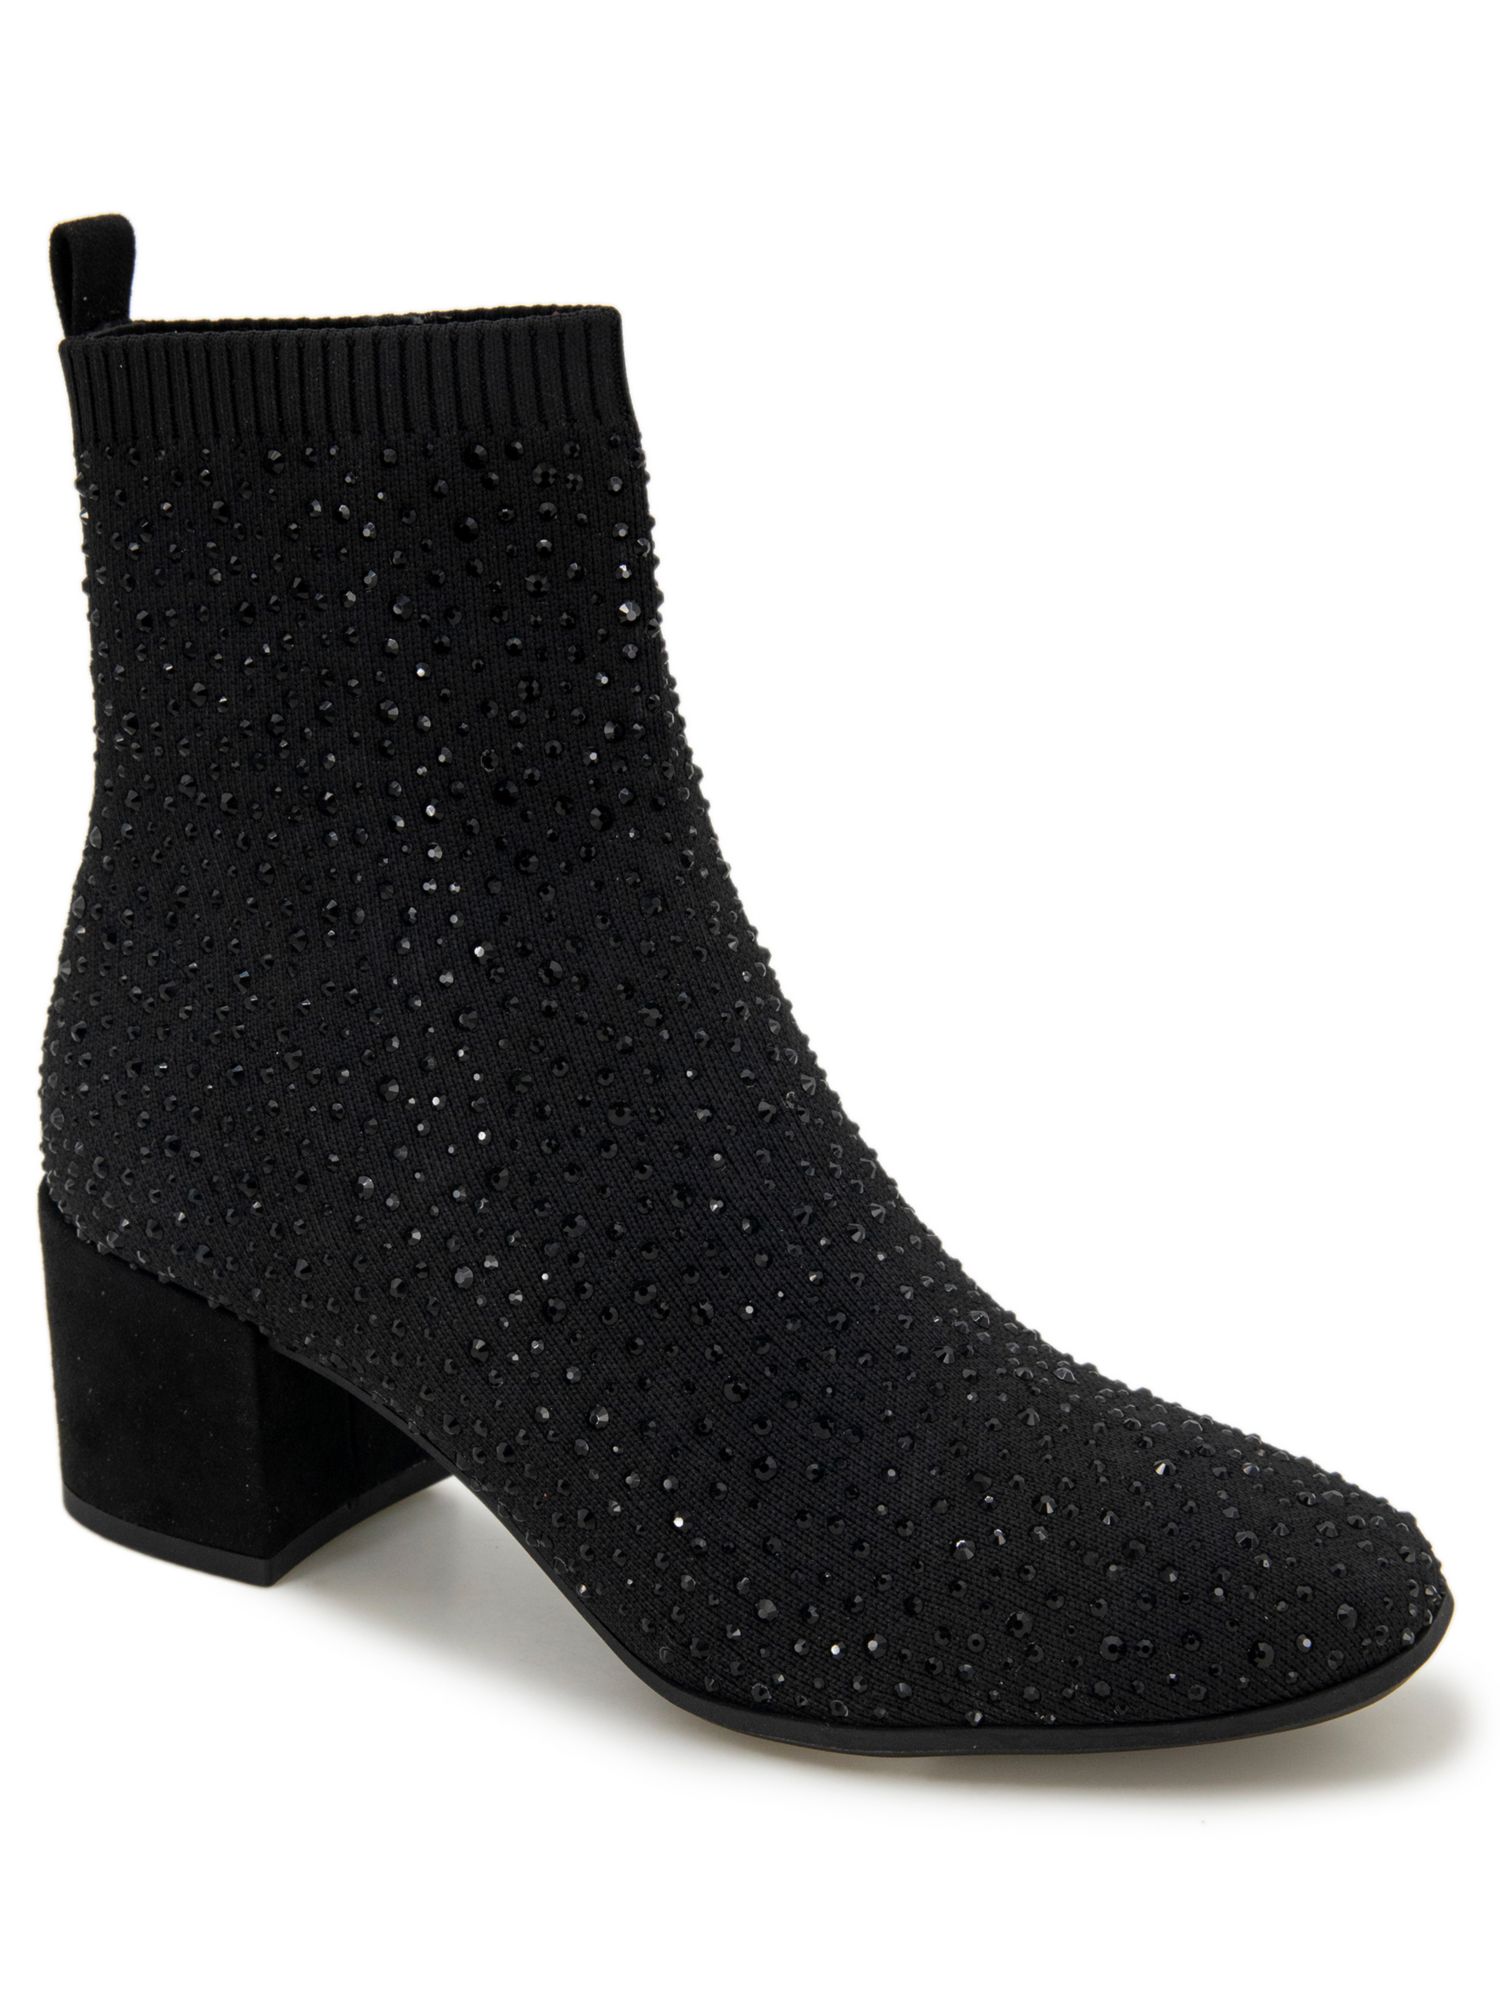 Kenneth Cole REACTION REACTION KENNETH COLE Womens Black Heel Pull-Tab Embellished Stretch Rida Square Toe Block Heel Dress Booties 8